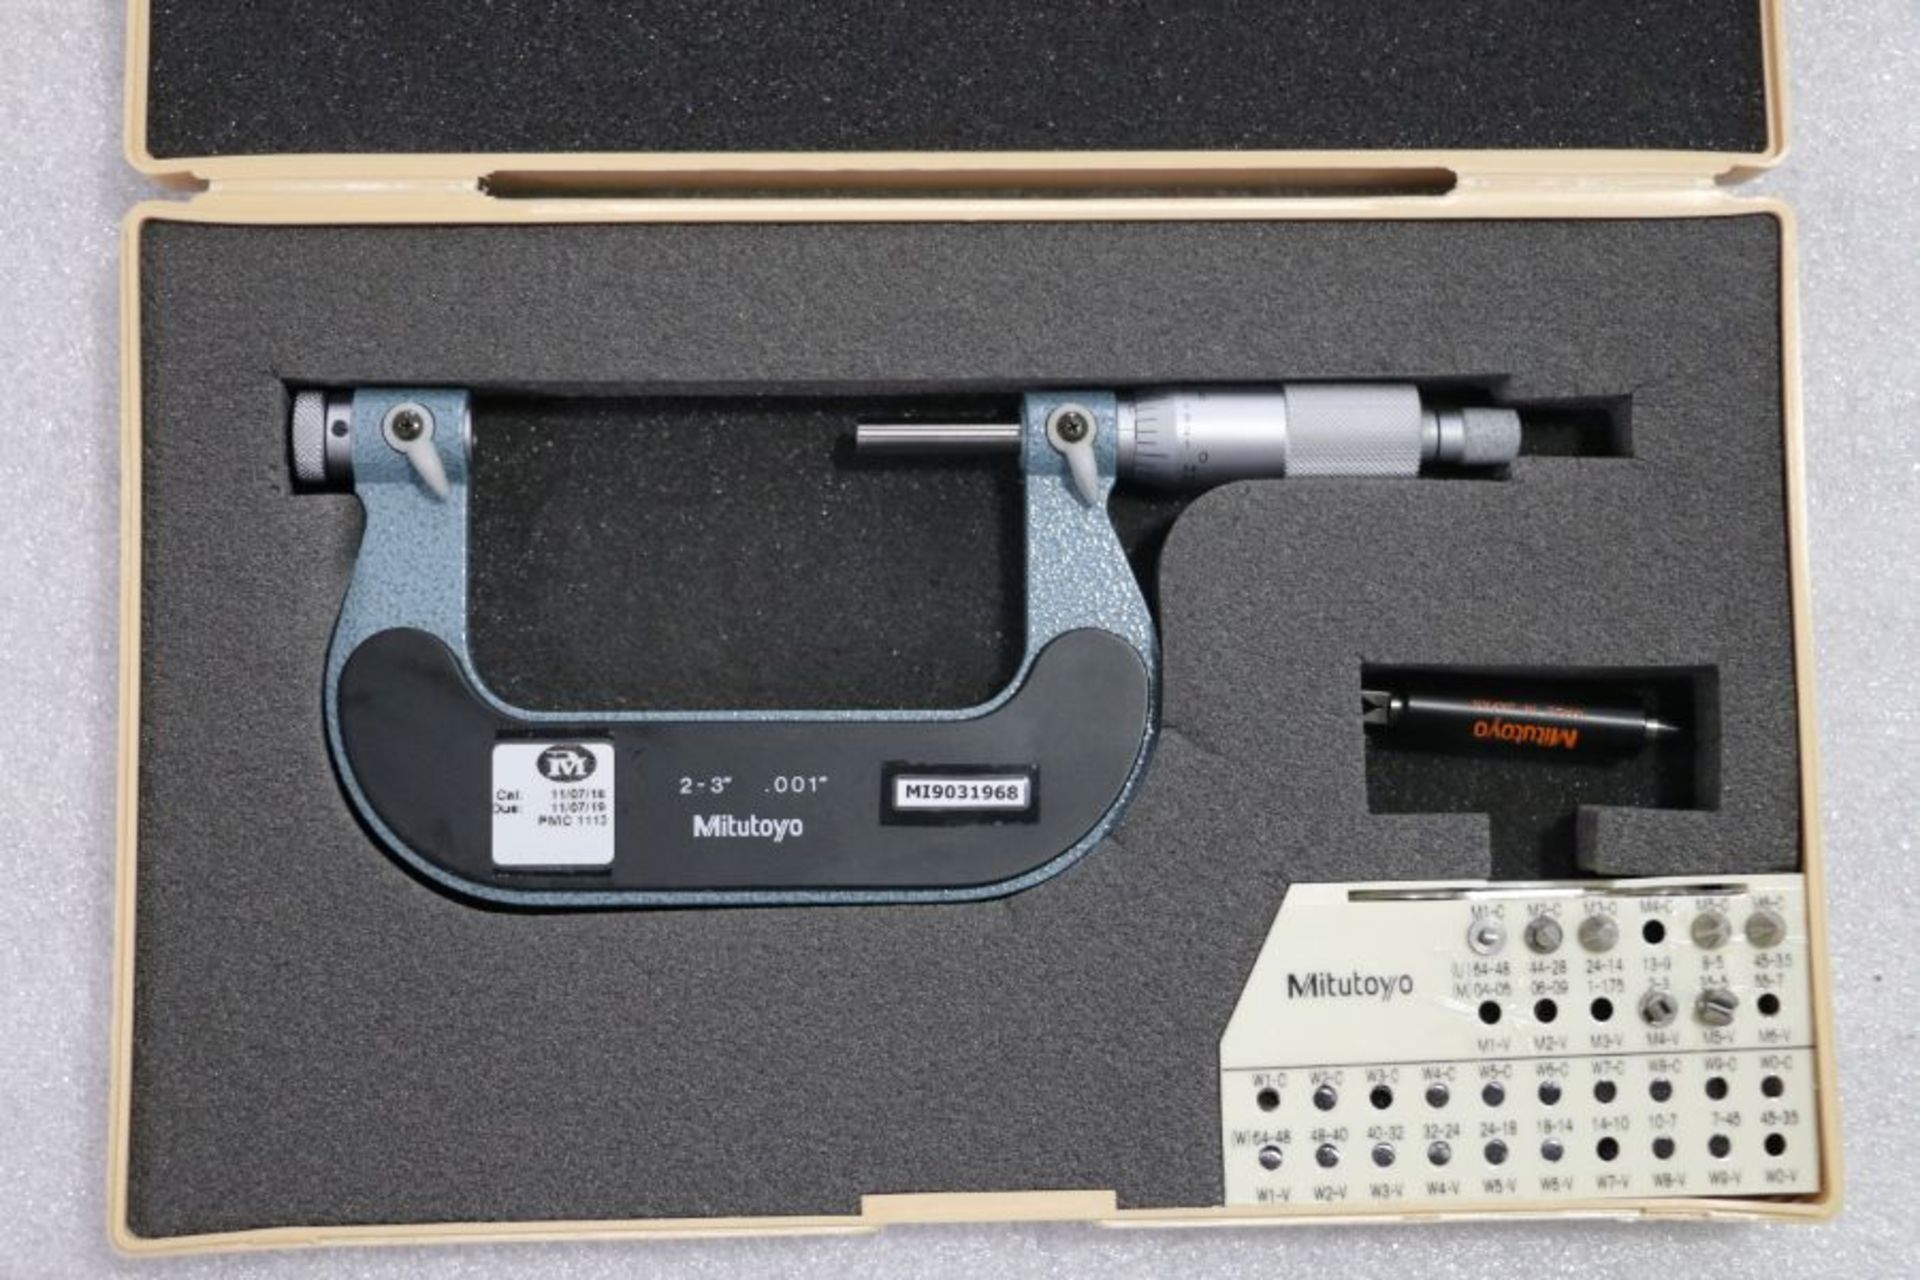 Mitutoyo 2" - 3" Pitch Micrometer